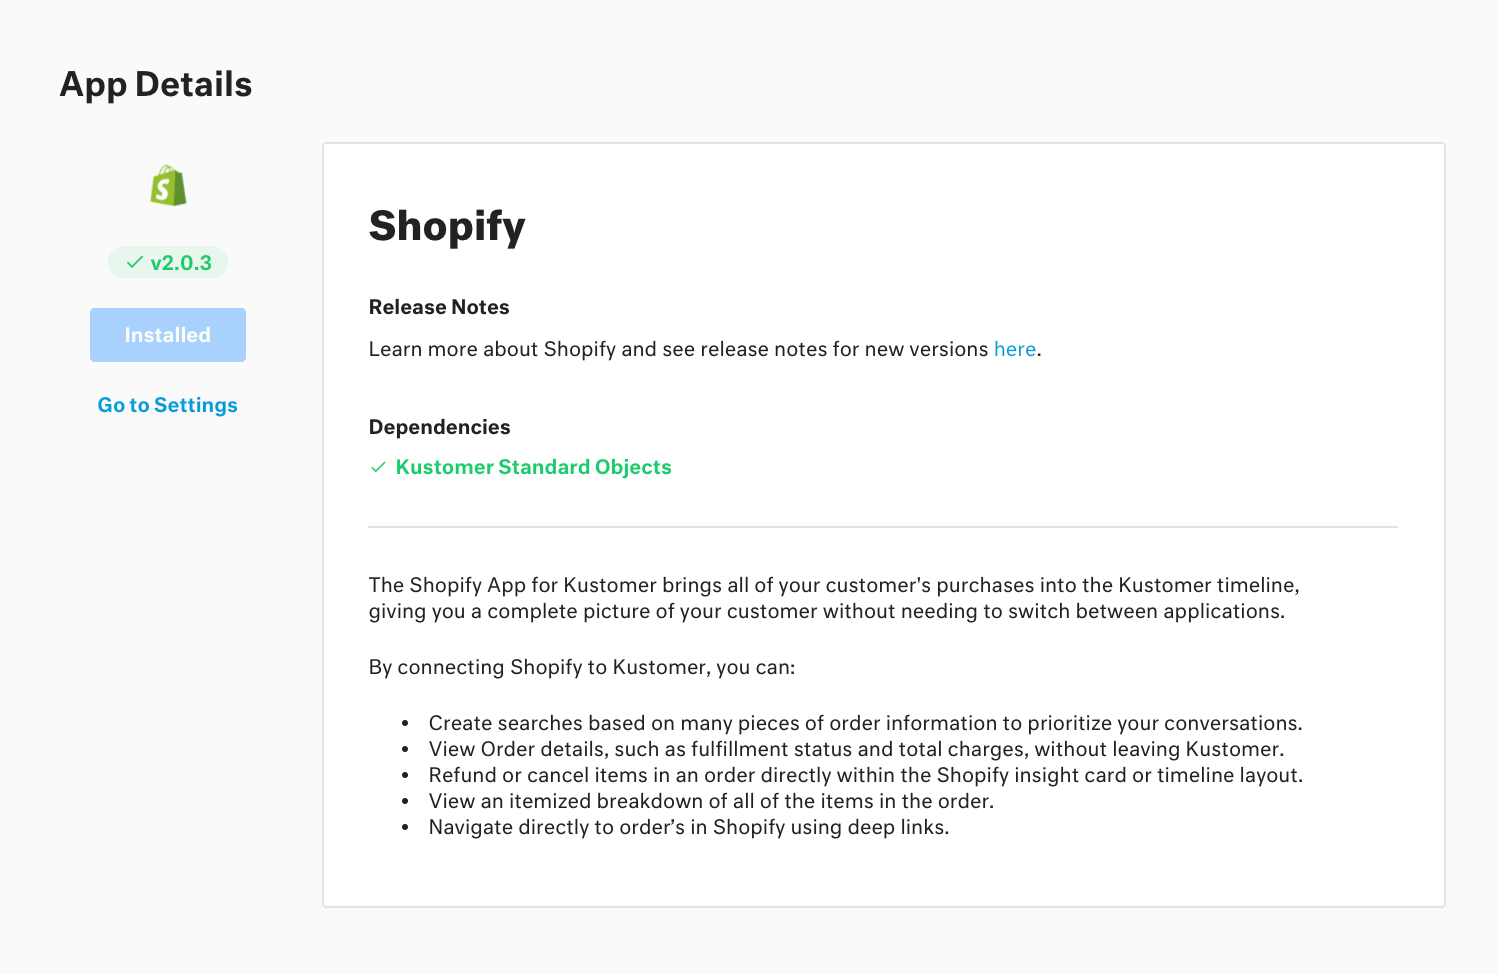 App details page for the Shopify app with app title, release notes, dependencies, and description.